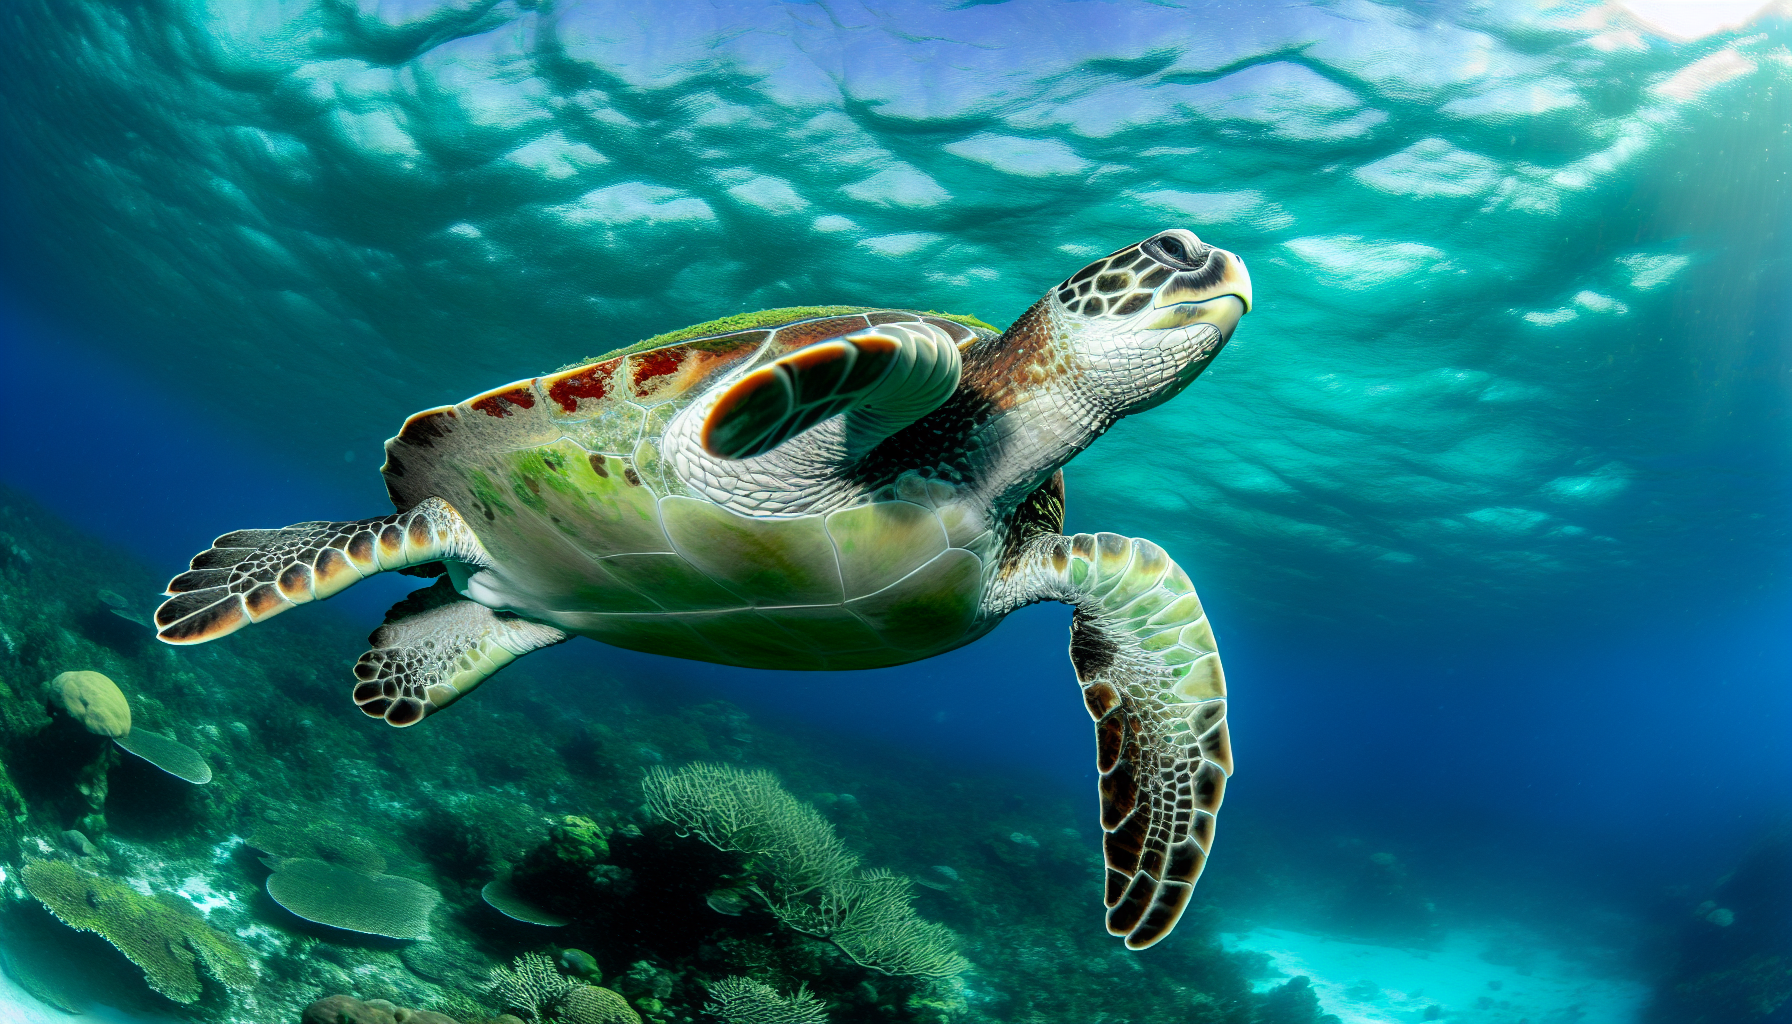 Green sea turtle swimming in clear tropical waters off the coast of Costa Rica